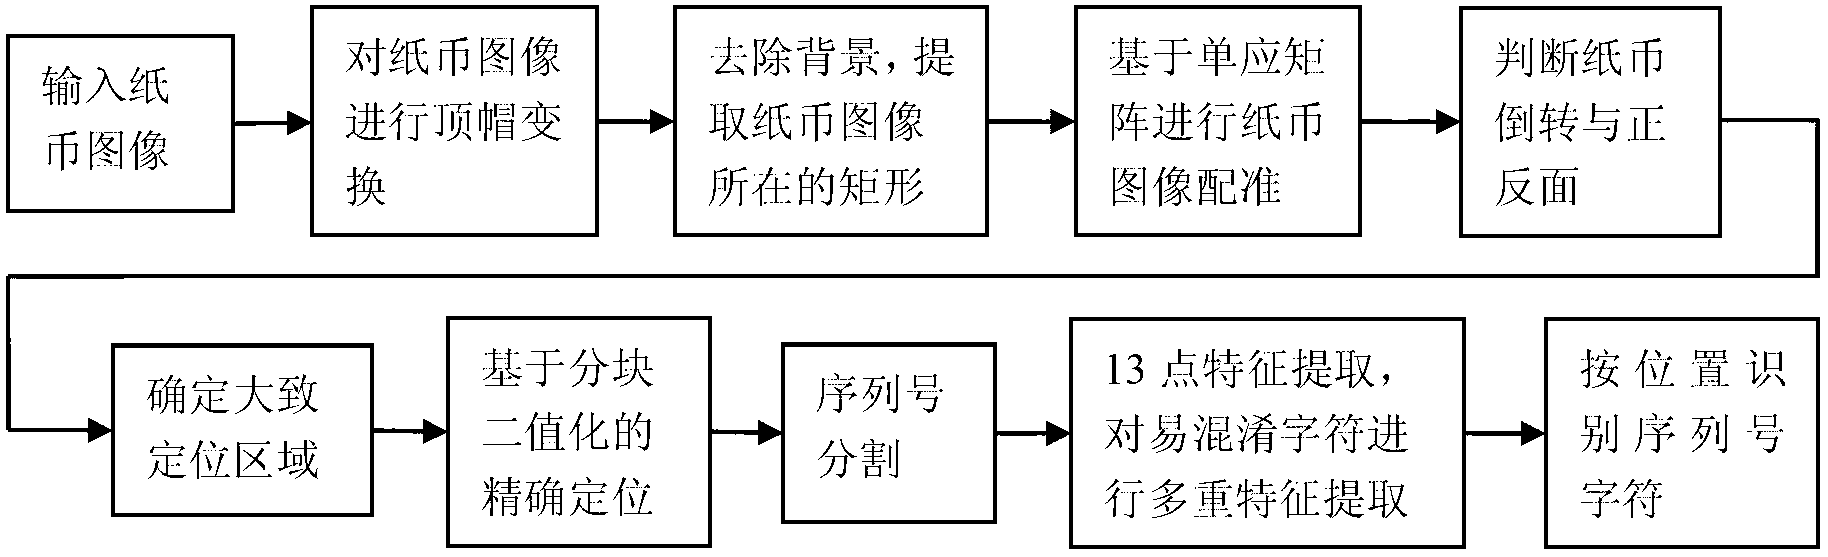 RMB sequence number identification method